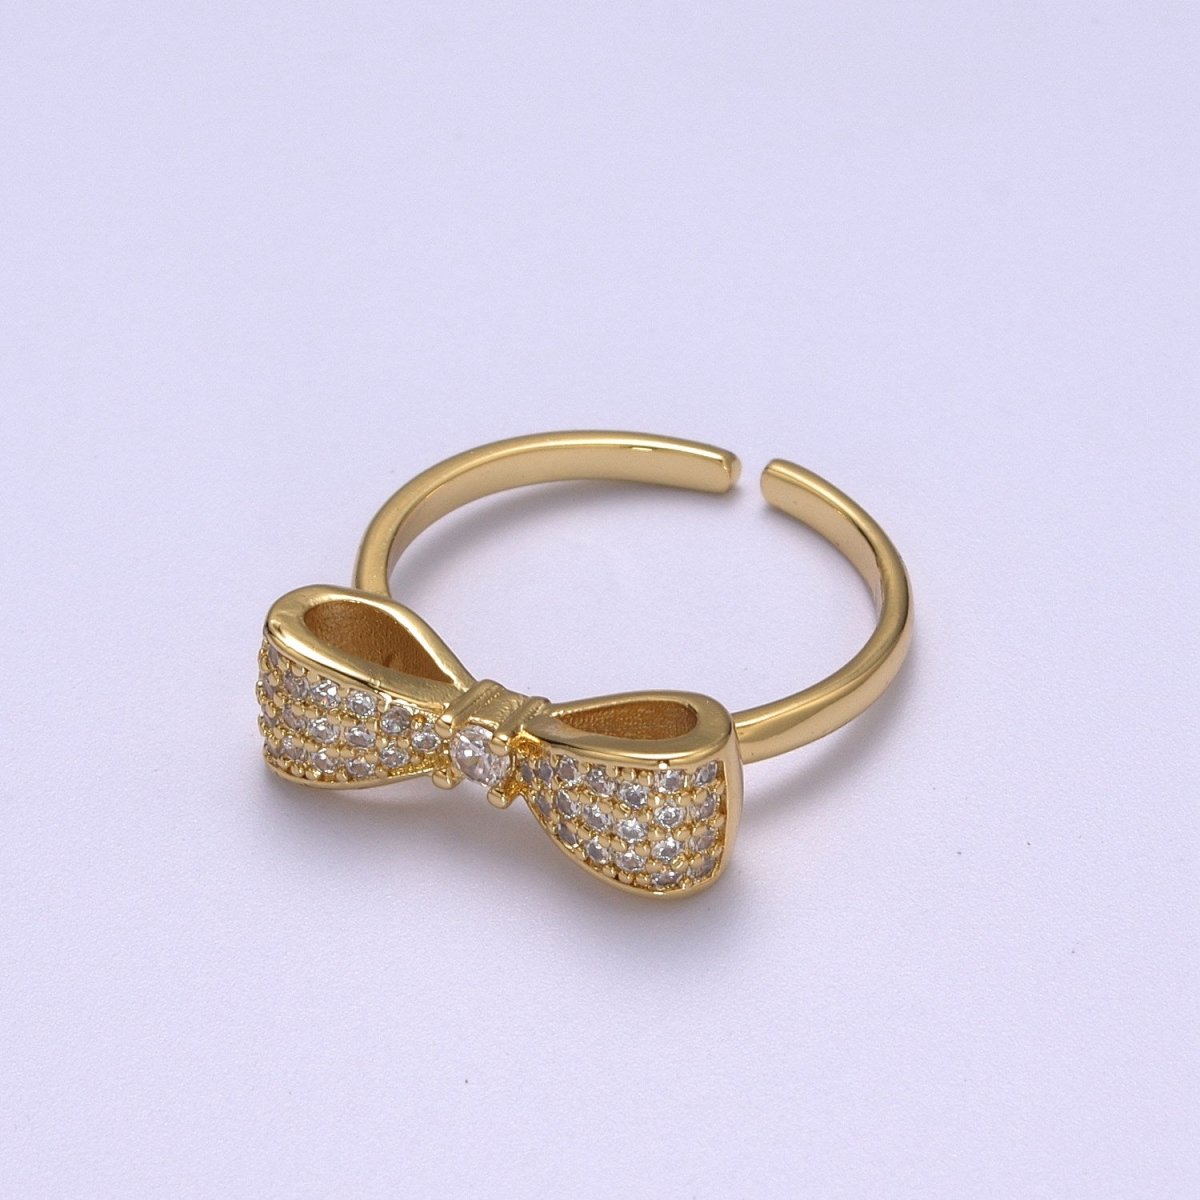 Dainty Gold Bow ring, Gold Minimalist Ring, Dainty Stackable Rings, Open Adjustable Ring CZ Ribbon Kawaii Cute Ring S-166 - DLUXCA